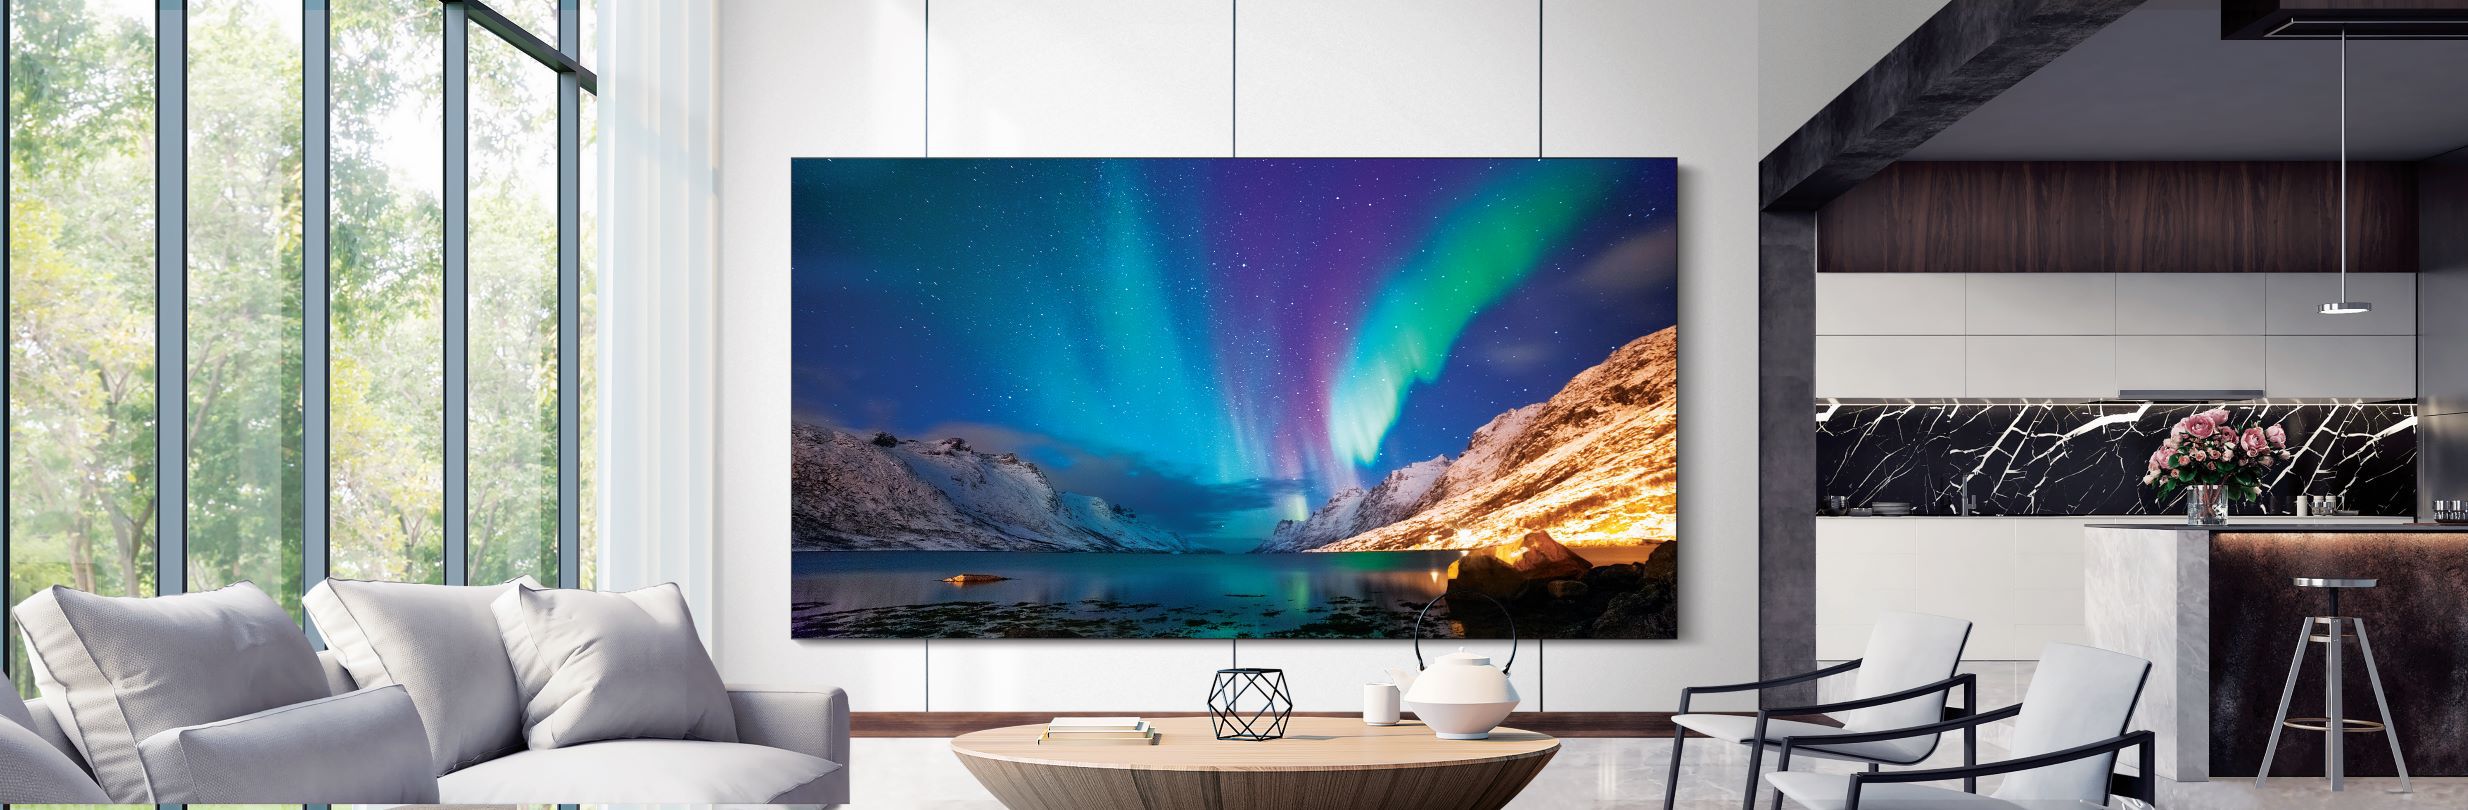 Samsung brings the new 8K, QLED and MicroLED TVs, the news to CES